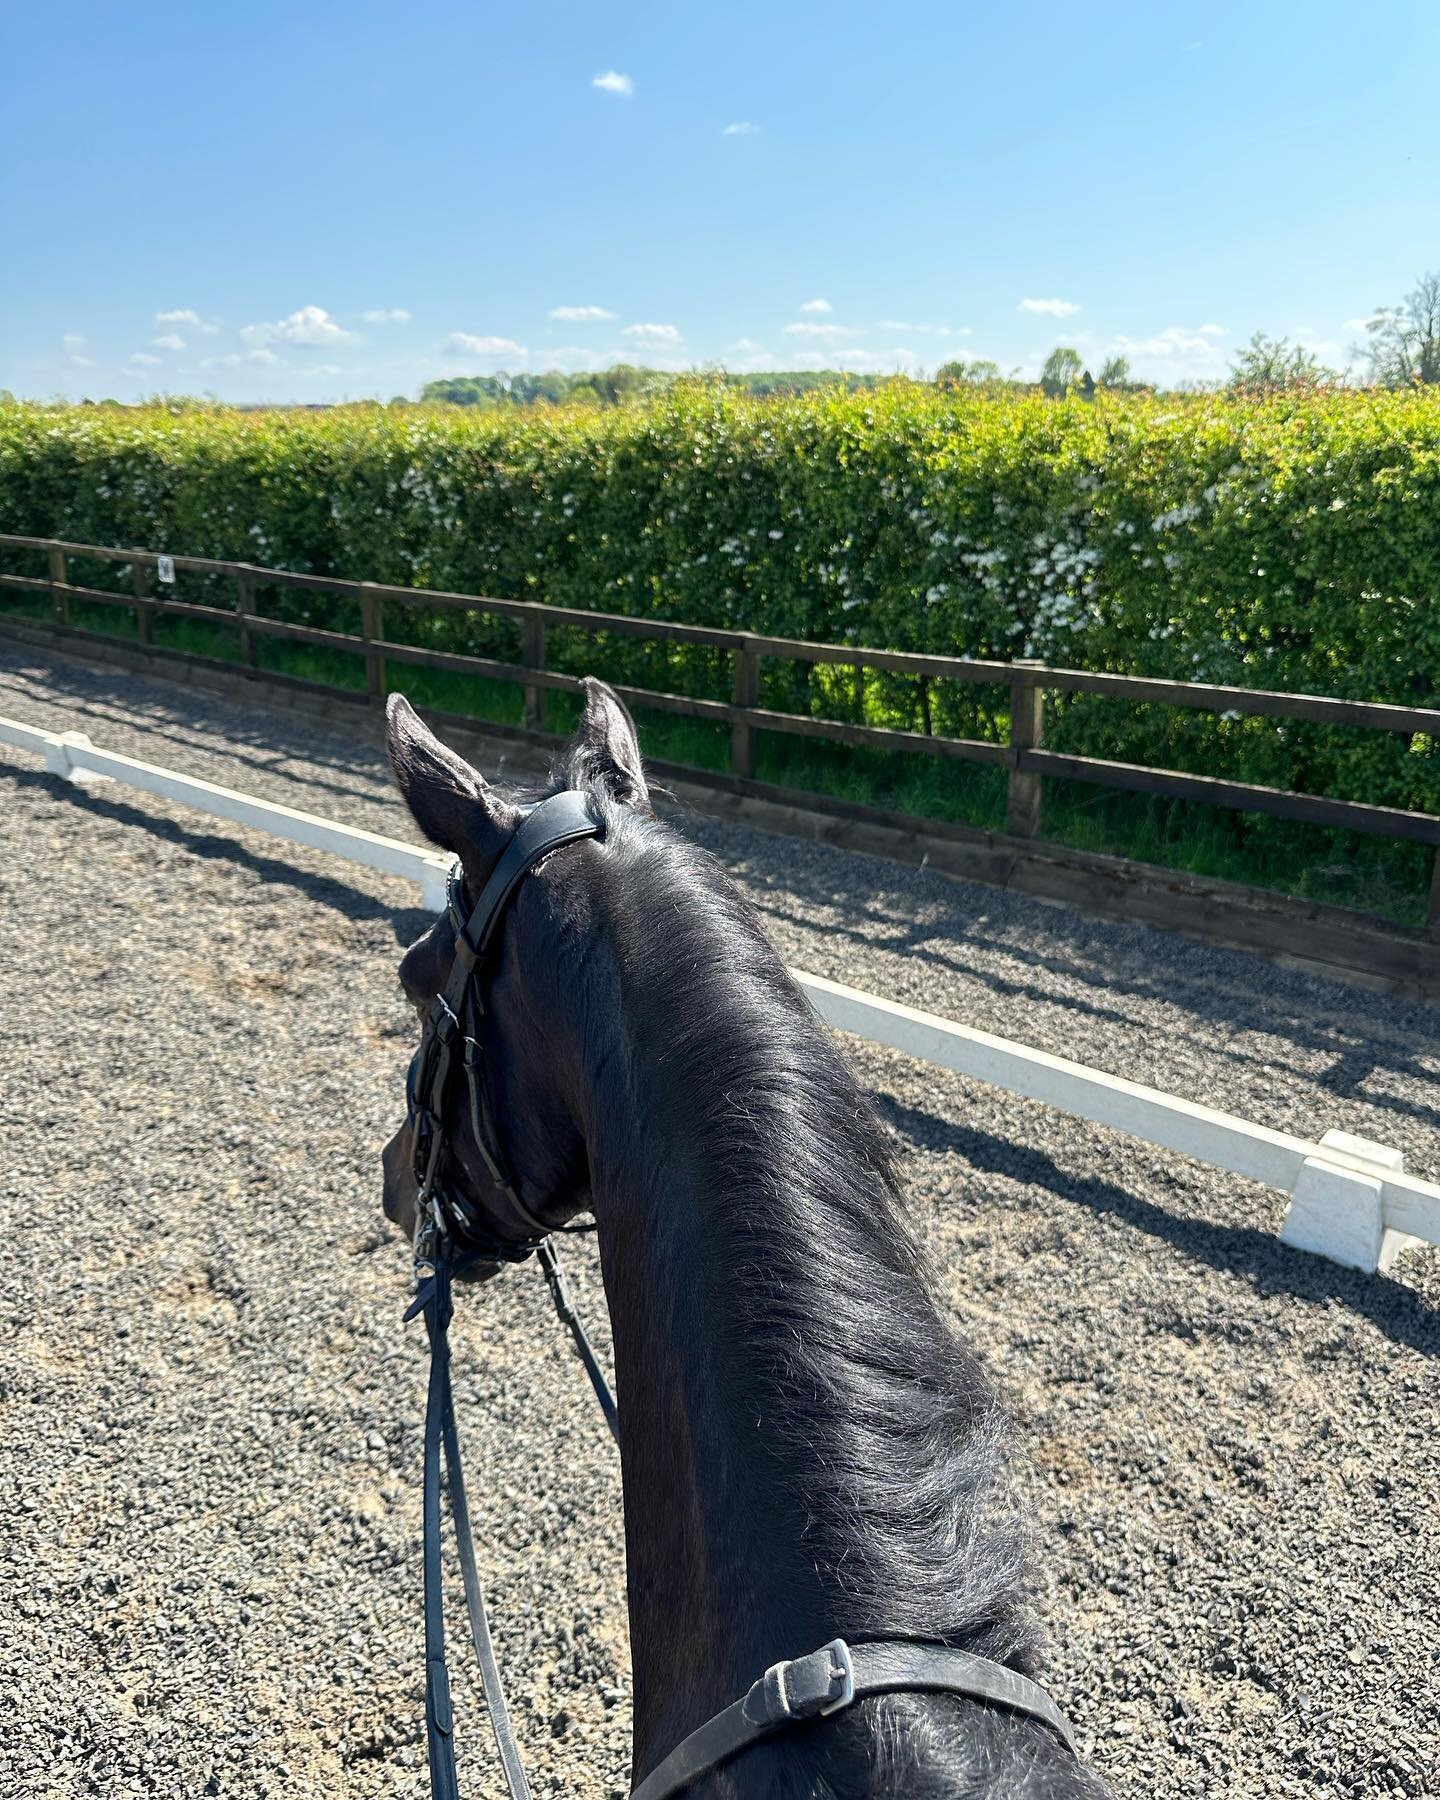 Today I only had 8 to ride and no teaching after a crazy busy week&hellip; I&rsquo;ve loved having no time constraints and just having the time to really work the horses with no pressure!! #happysunnydays #TCE #dreamjob #dressagehorse #dressagedays